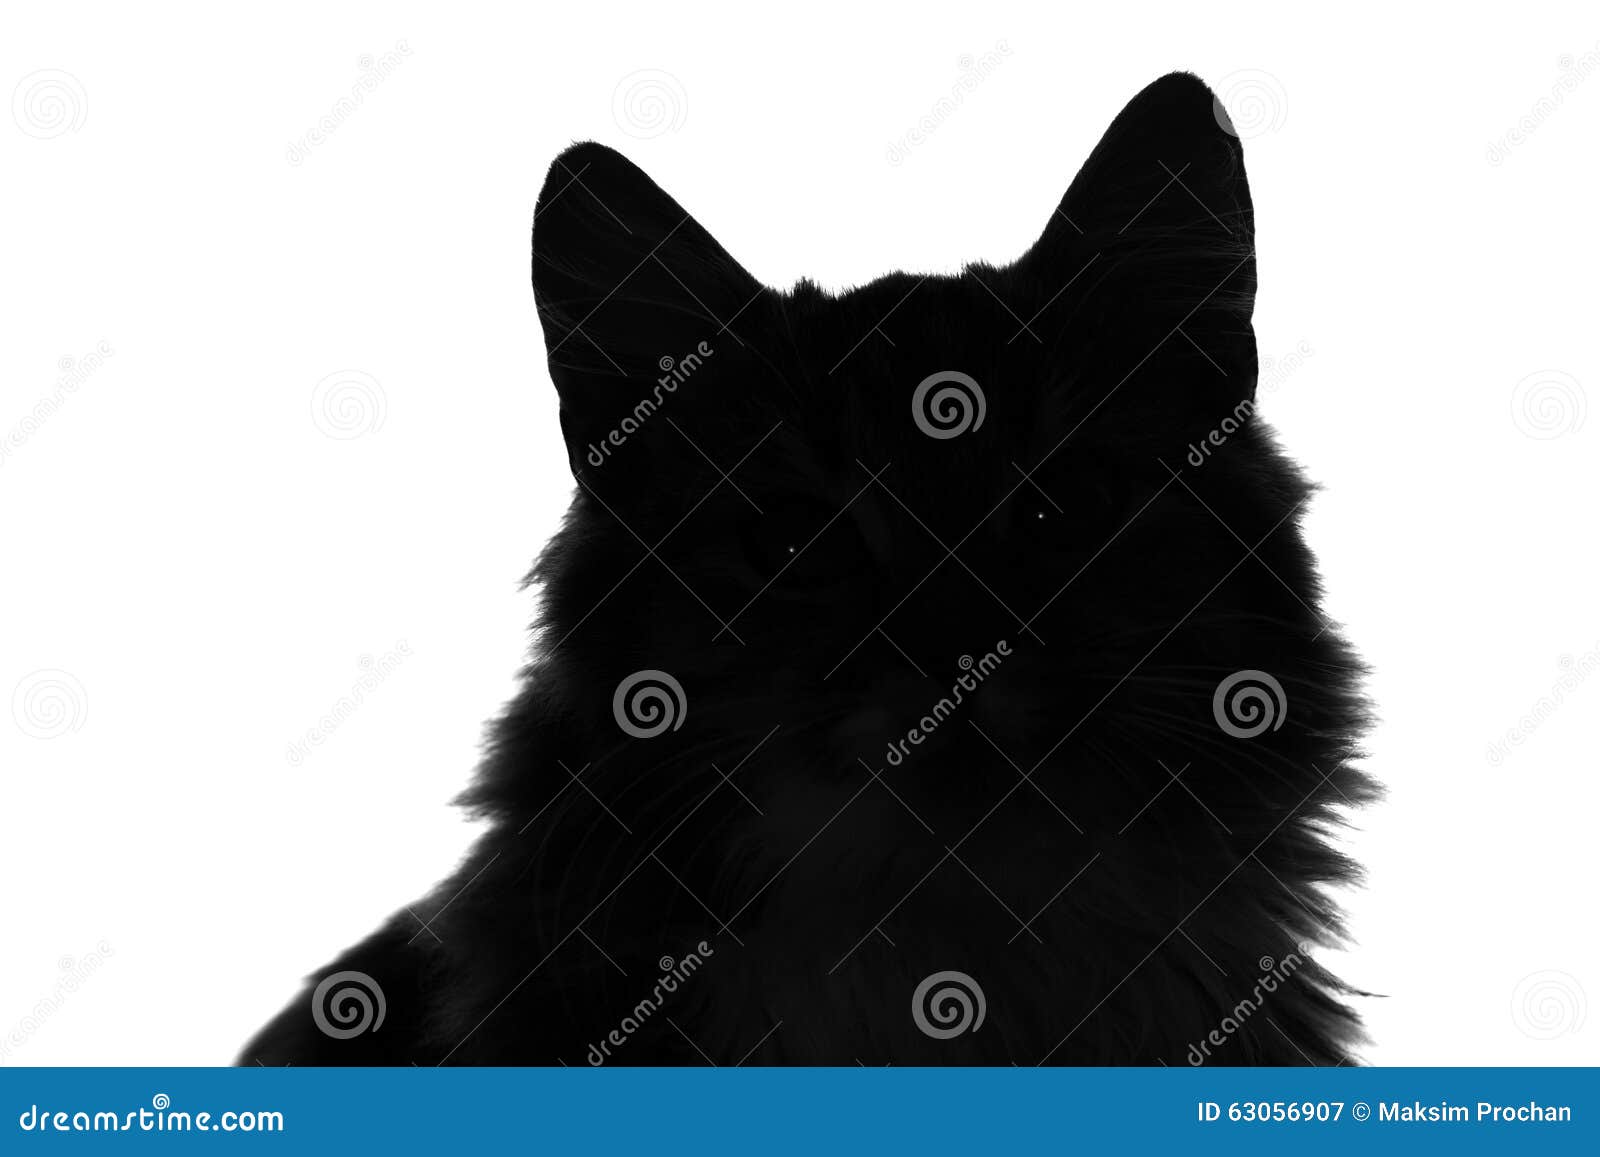 Silhouette of Fluffy Cat on a White Background Stock Image - Image of